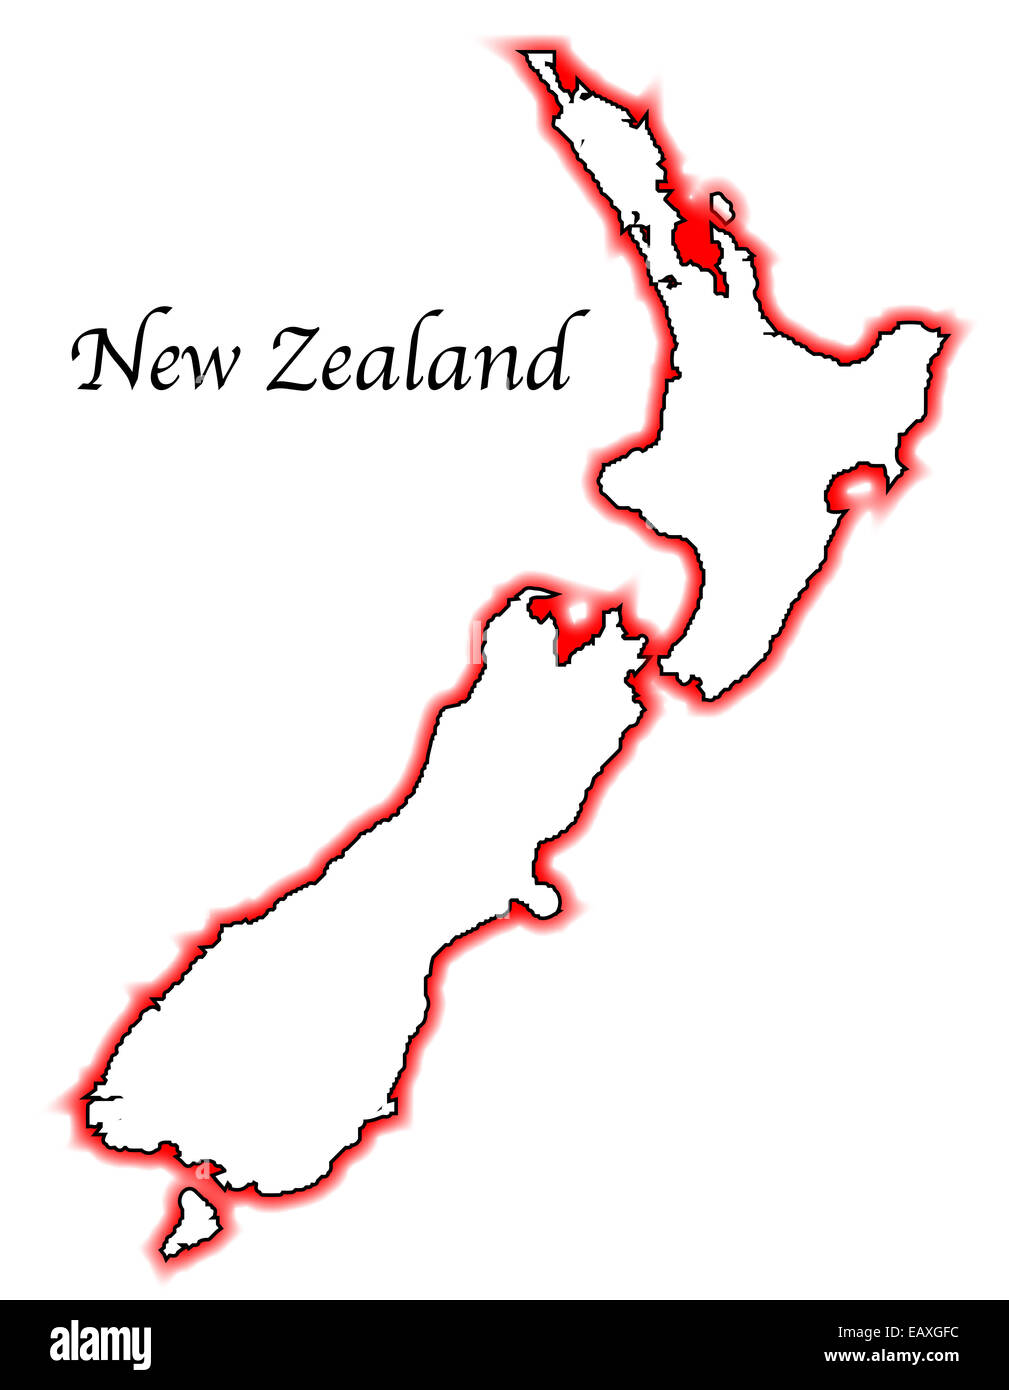 Outline map of New Zealand over a white background Stock Photo